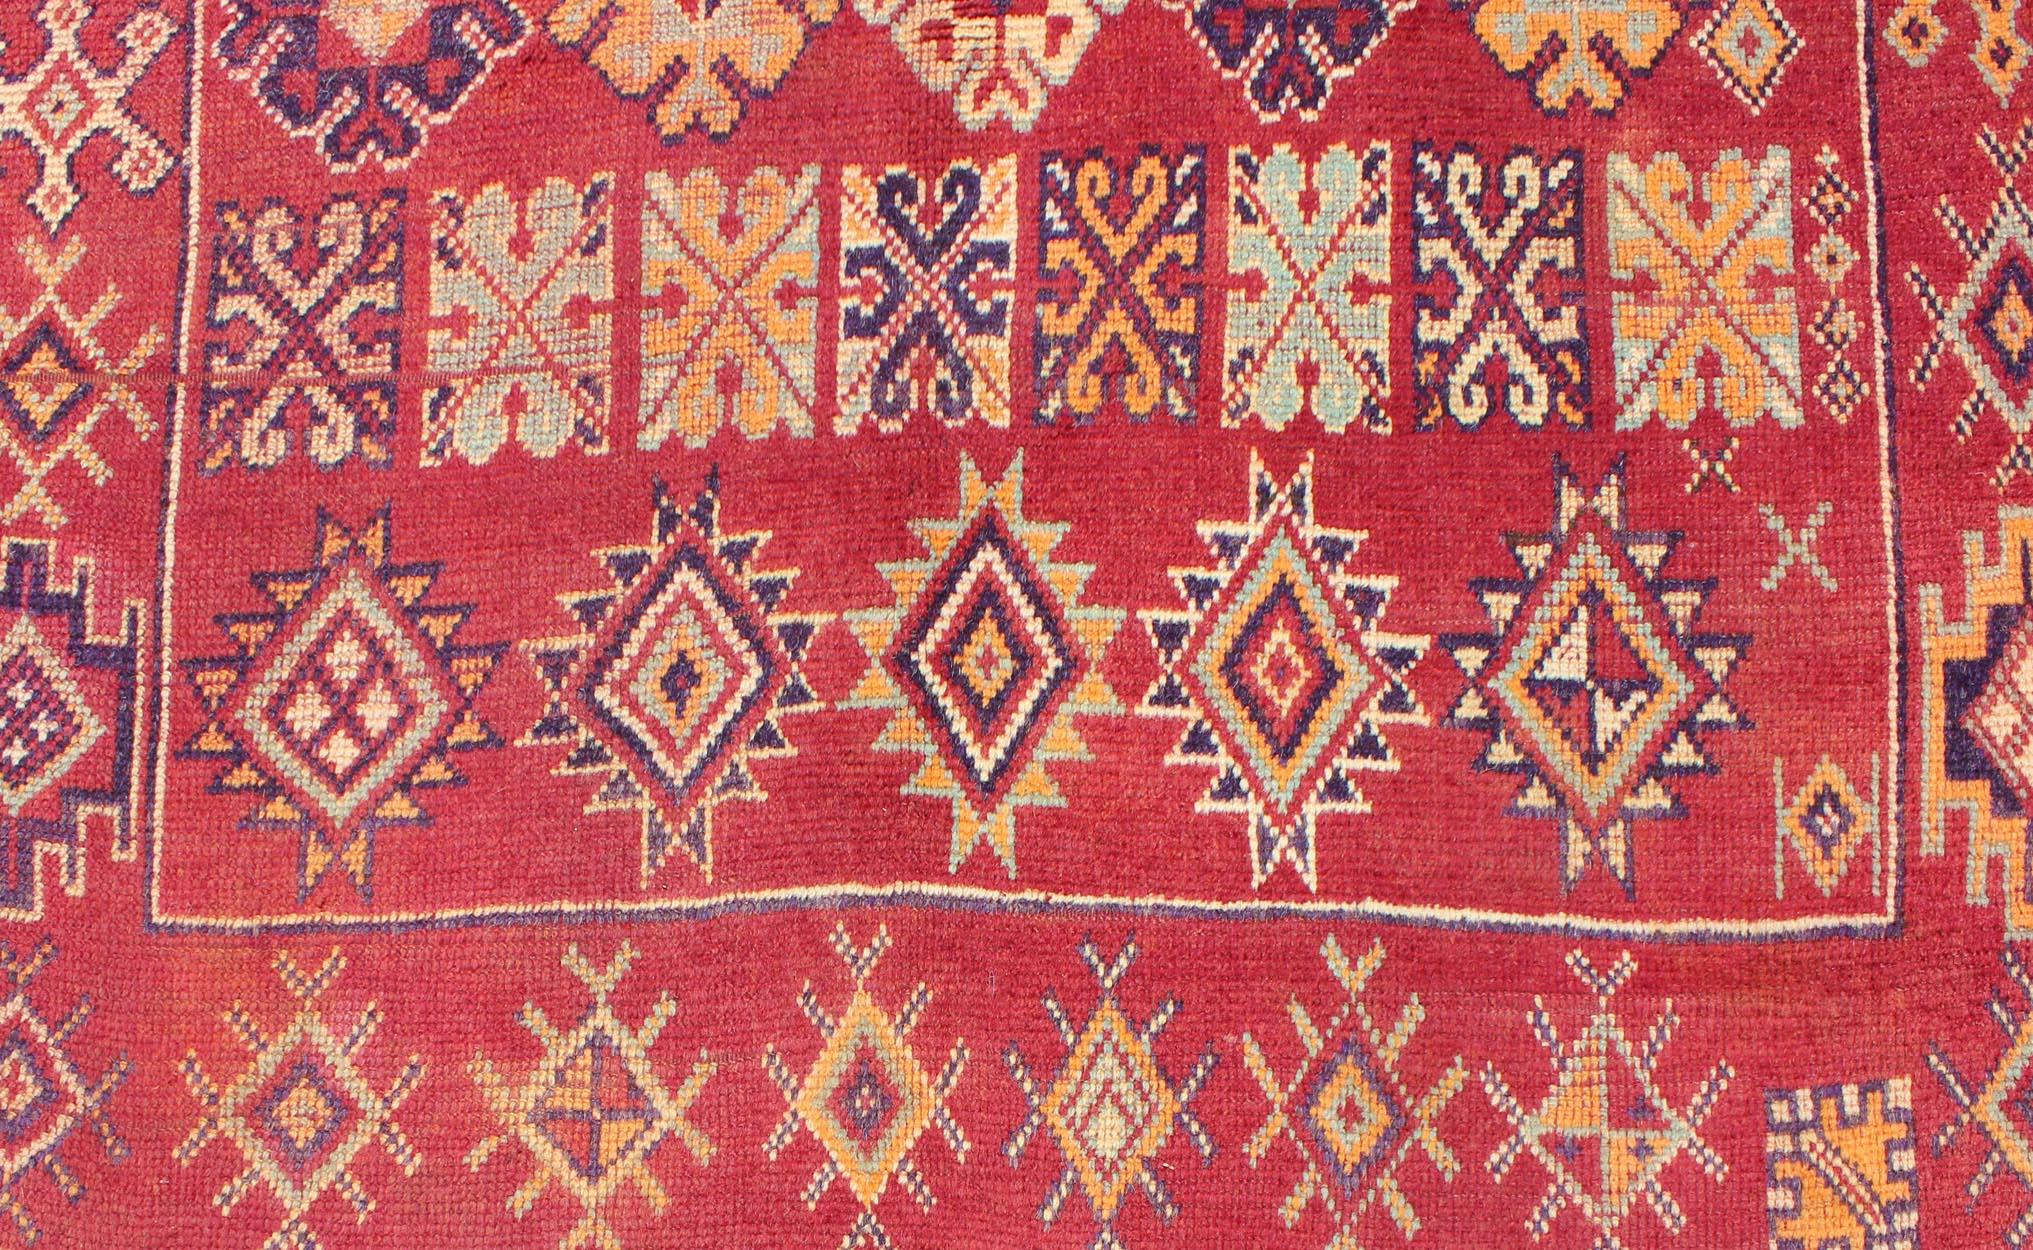 Antique Moroccan Rug in Crimson Red, Orange, Blue and Yellow 2